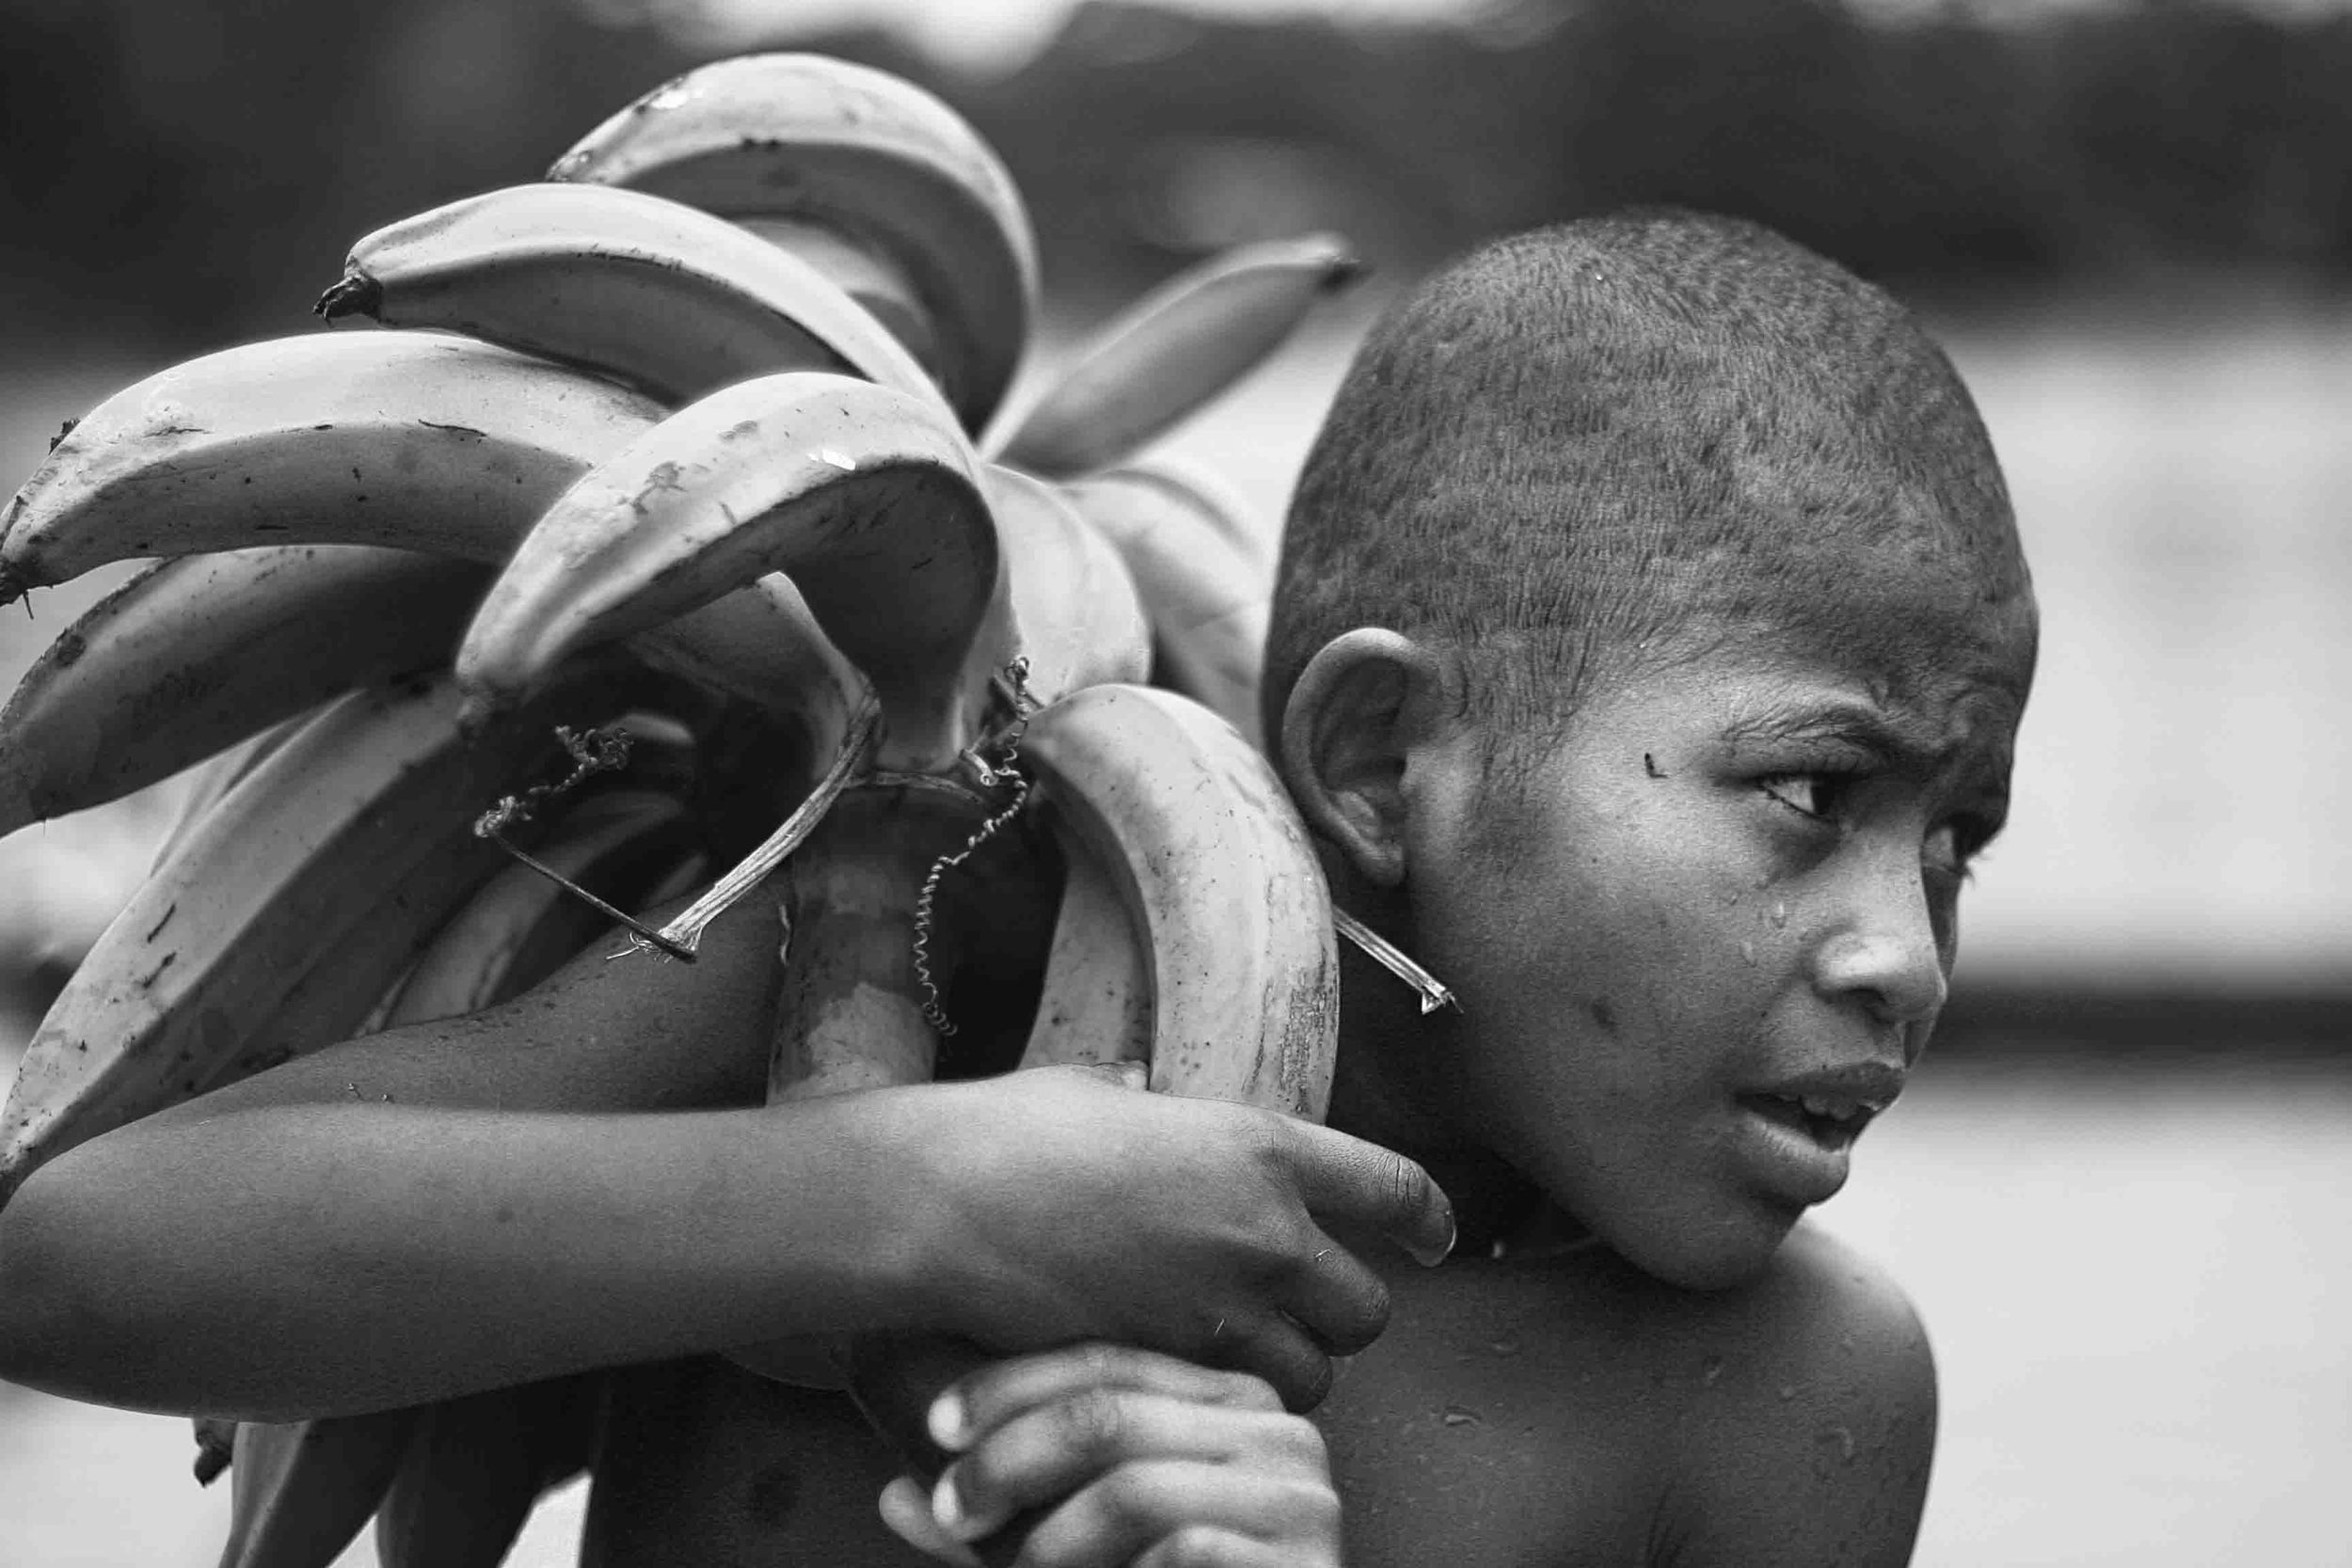  A child carries a branch of bananas back to his house. Limones, Ecuador. 2009. 